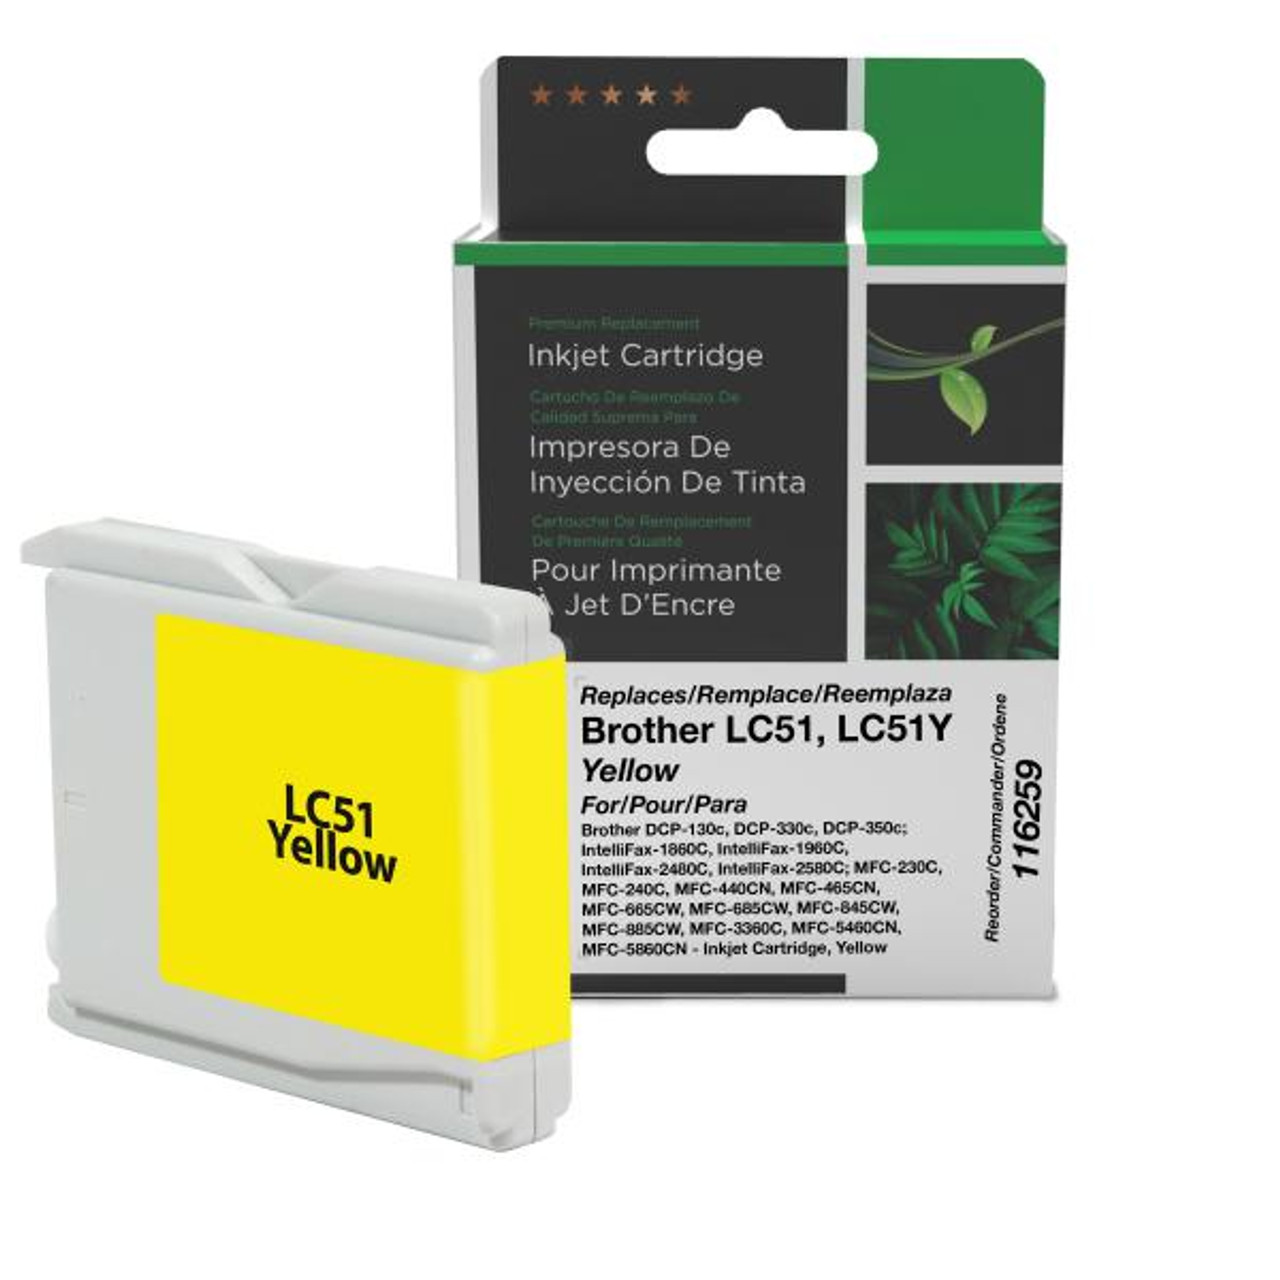 Yellow Ink Cartridge for Brother LC51-1